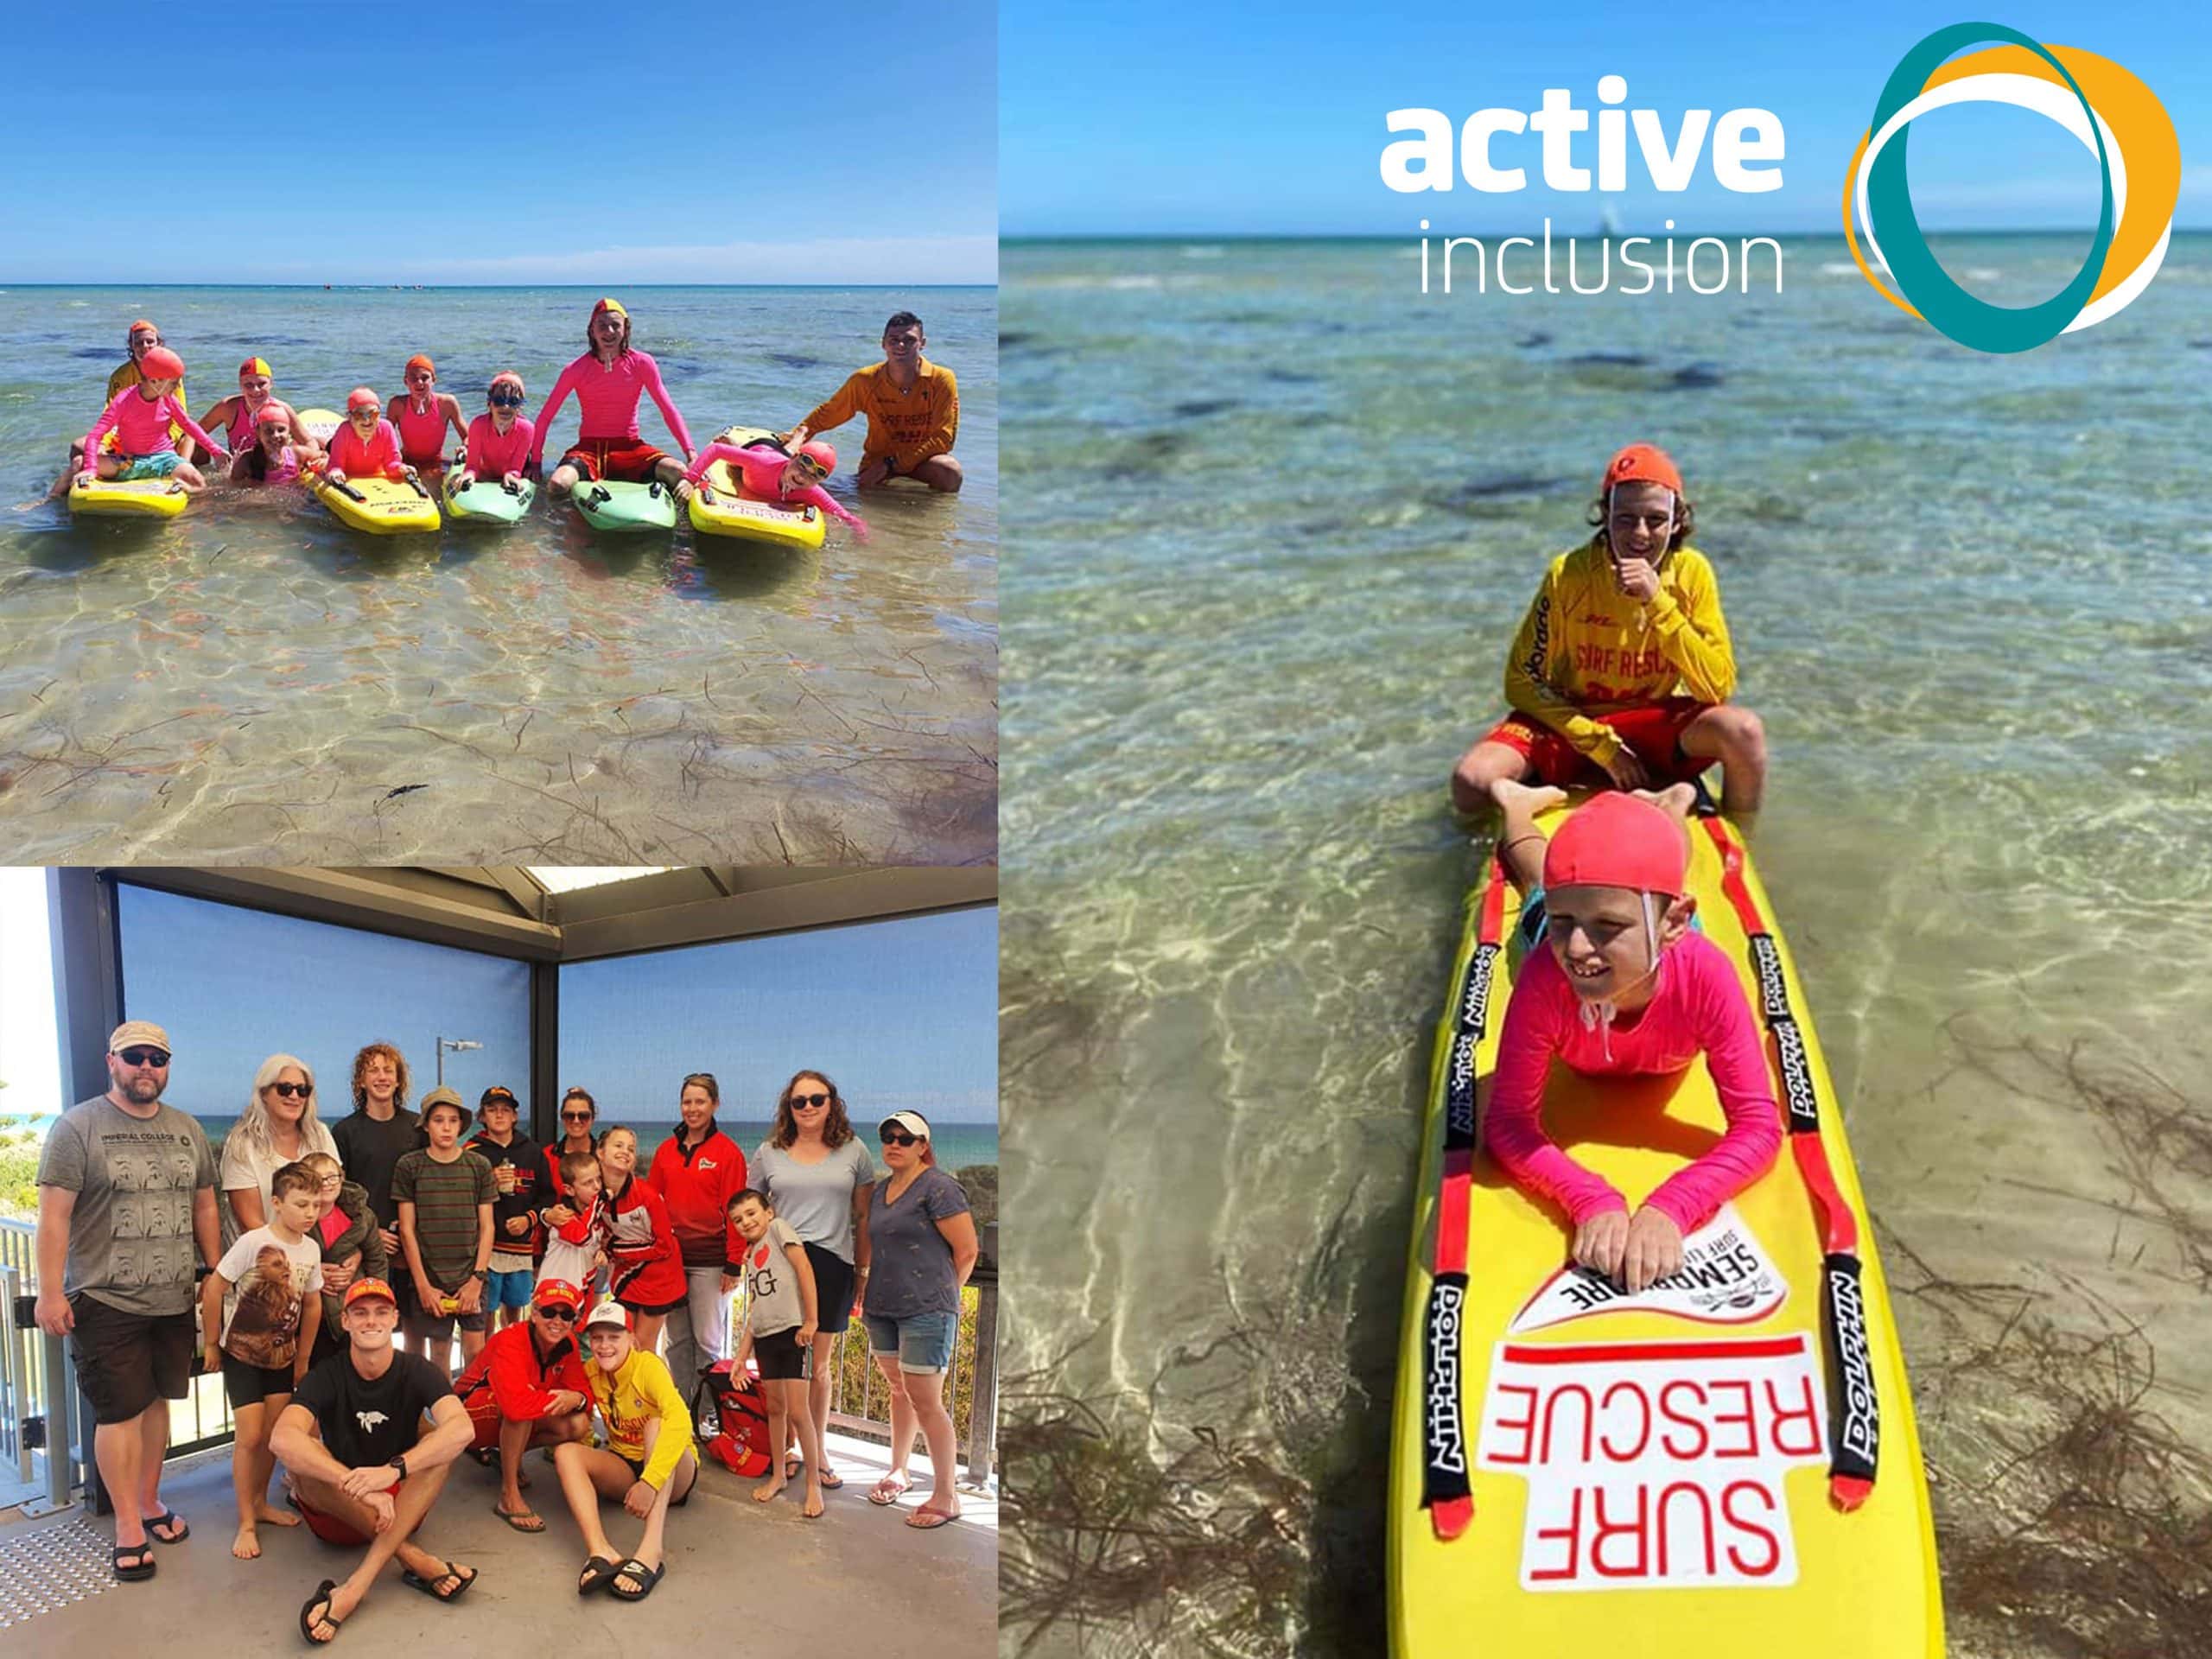 Three images make up graphic. First Image is of young Seabird Nippers members in the shallow water at the beach on surf life saving boards with their program buddies/instructors. Second photo shows a seabird nippers participant and their buddy on a board in the water. Third image shows seabird nippers, their caregivers and program staff together. The Active Inclusion logo appears in the top right hand corner.